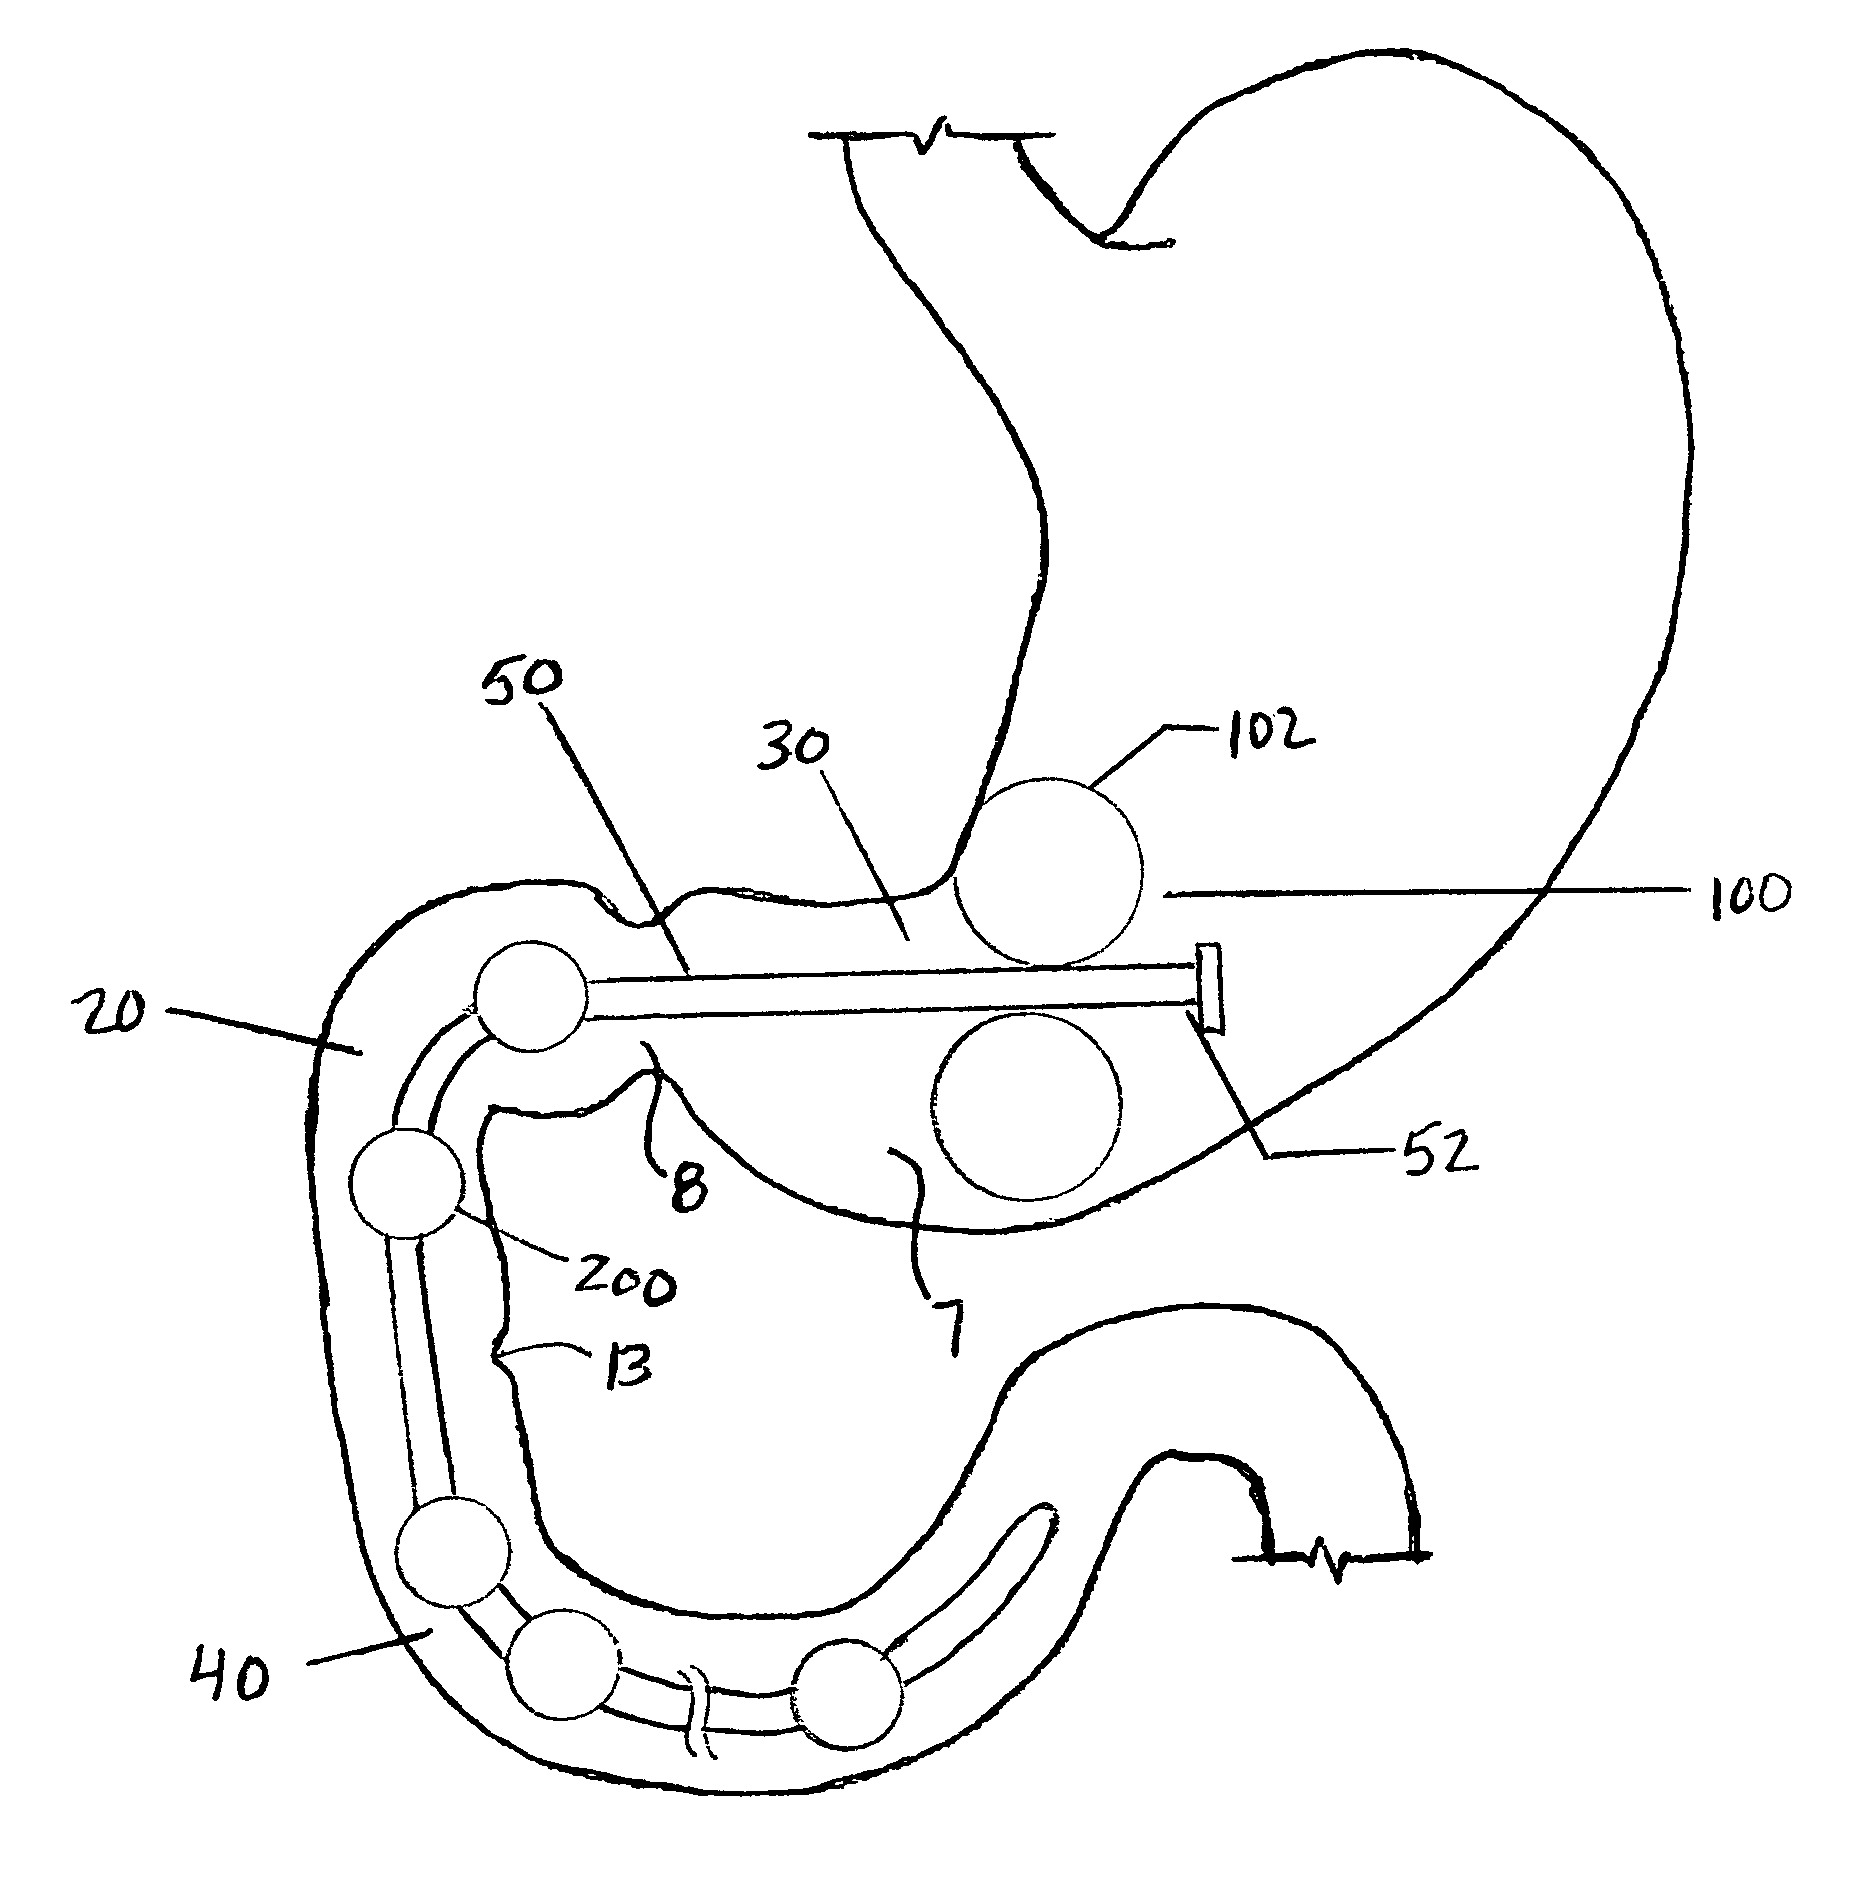 Method and apparatus for reducing obesity